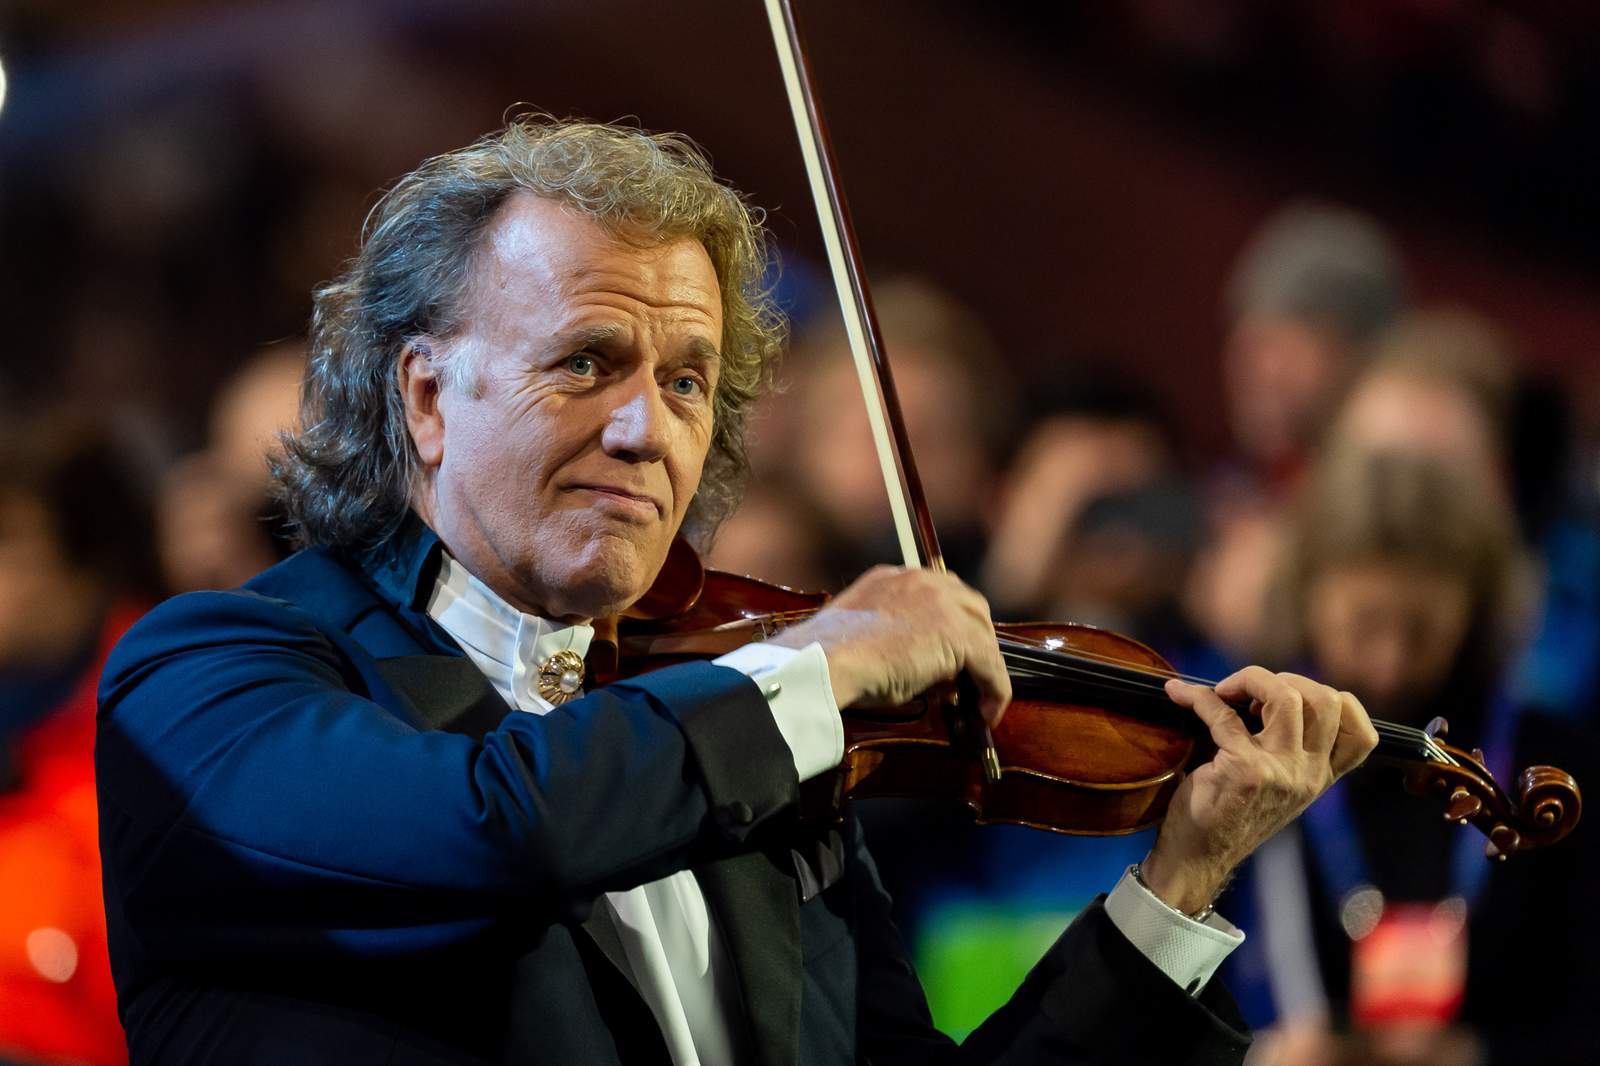 Enter to win tickets for André Rieu concert